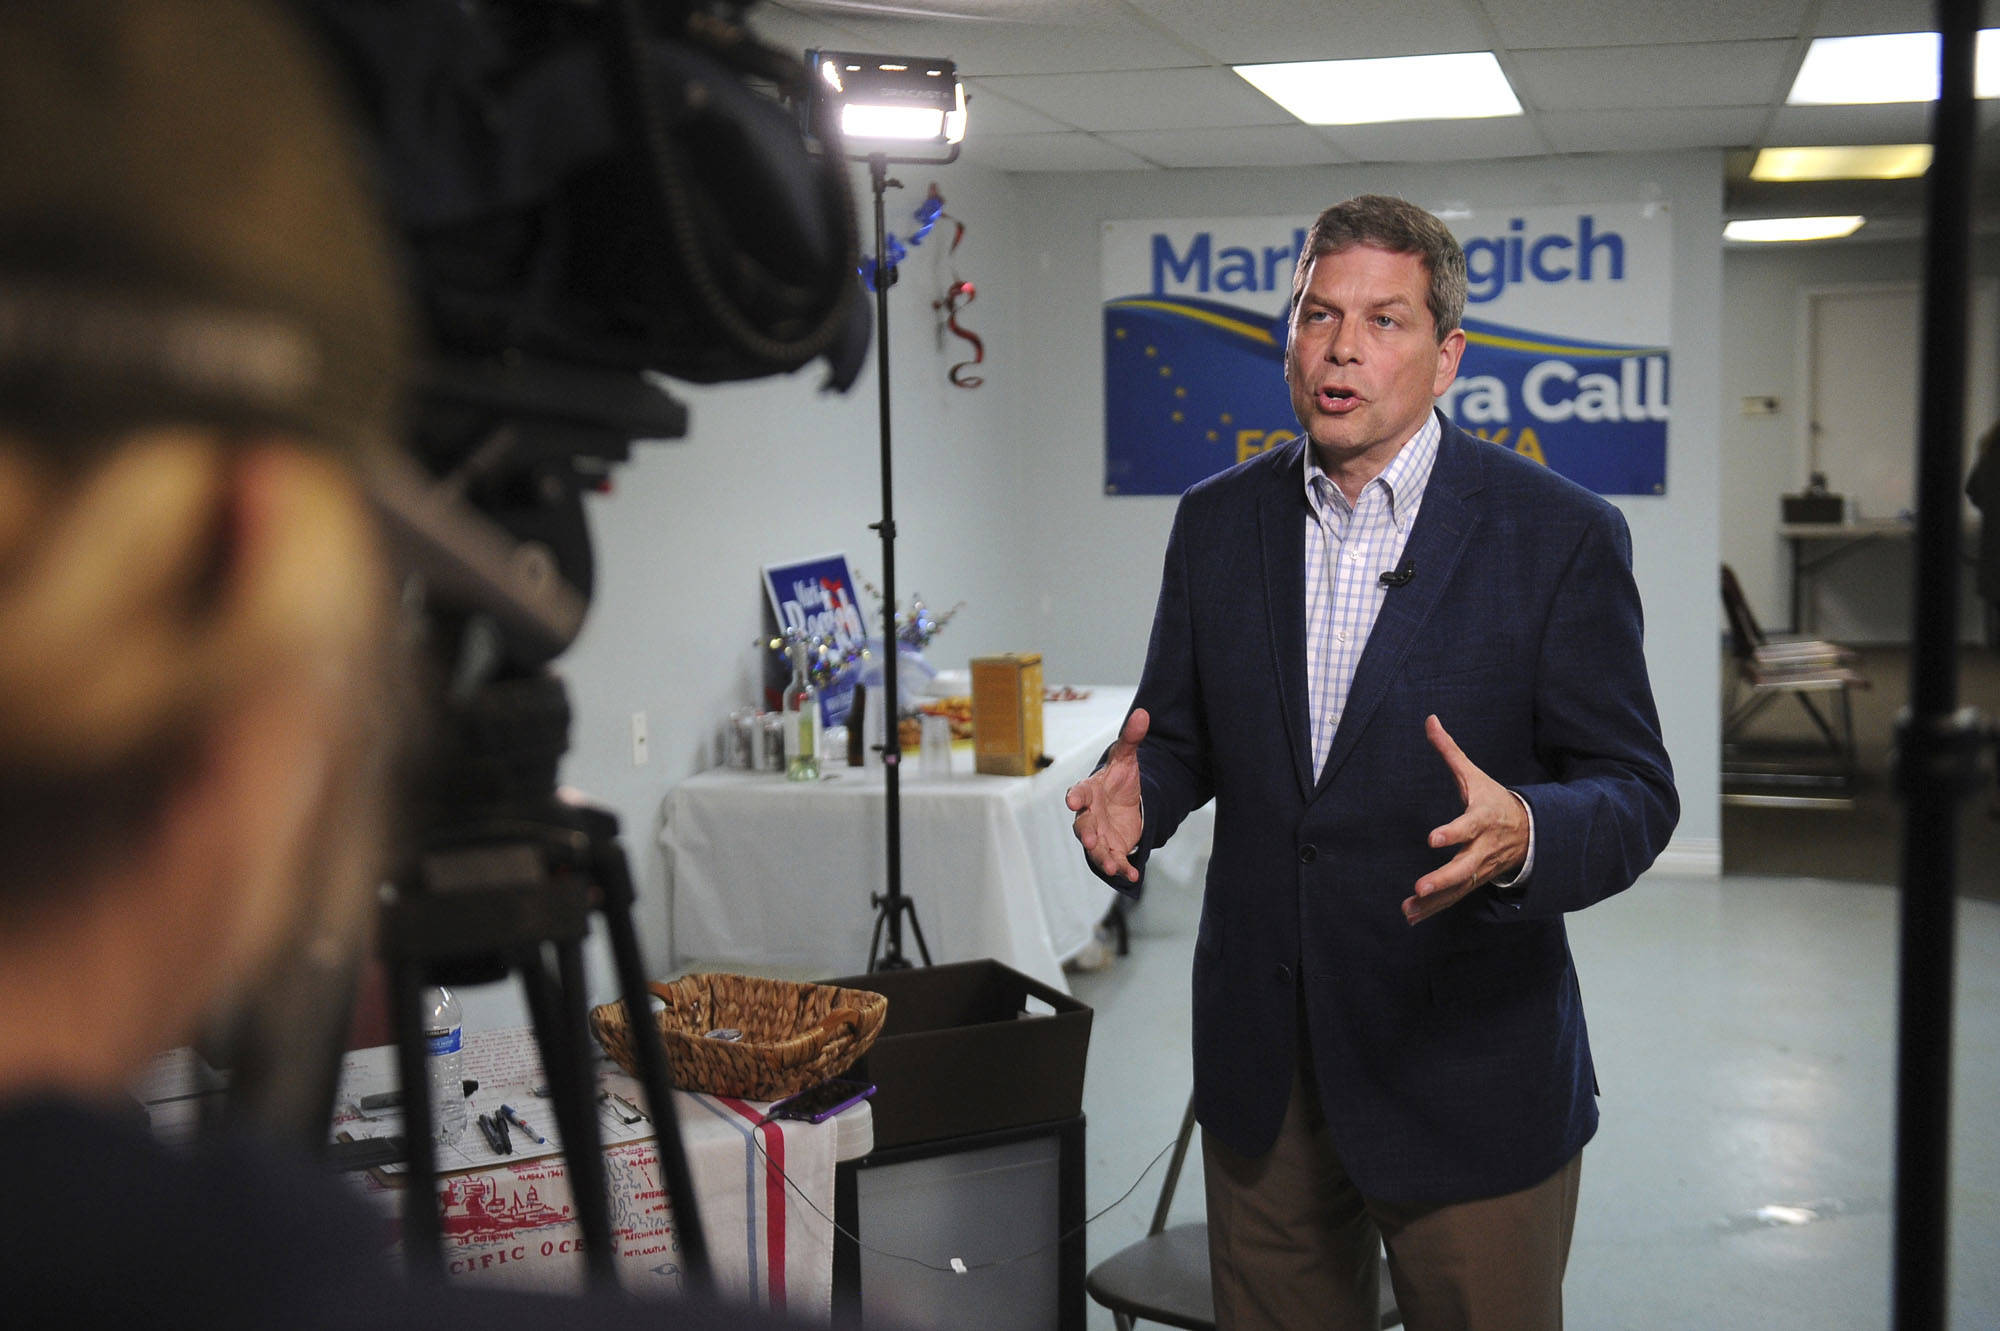 Democratic gubernatorial candidate Mark Begich is interviewed following his primary victory Tuesday Aug. 21, 2018, in Anchorage, Alaska. Begich, a former U.S. Senator, is facing incumbent Gov. Bill Walker and former state senator Mike Dunleavy. (AP Photo | Michael Dinneen)